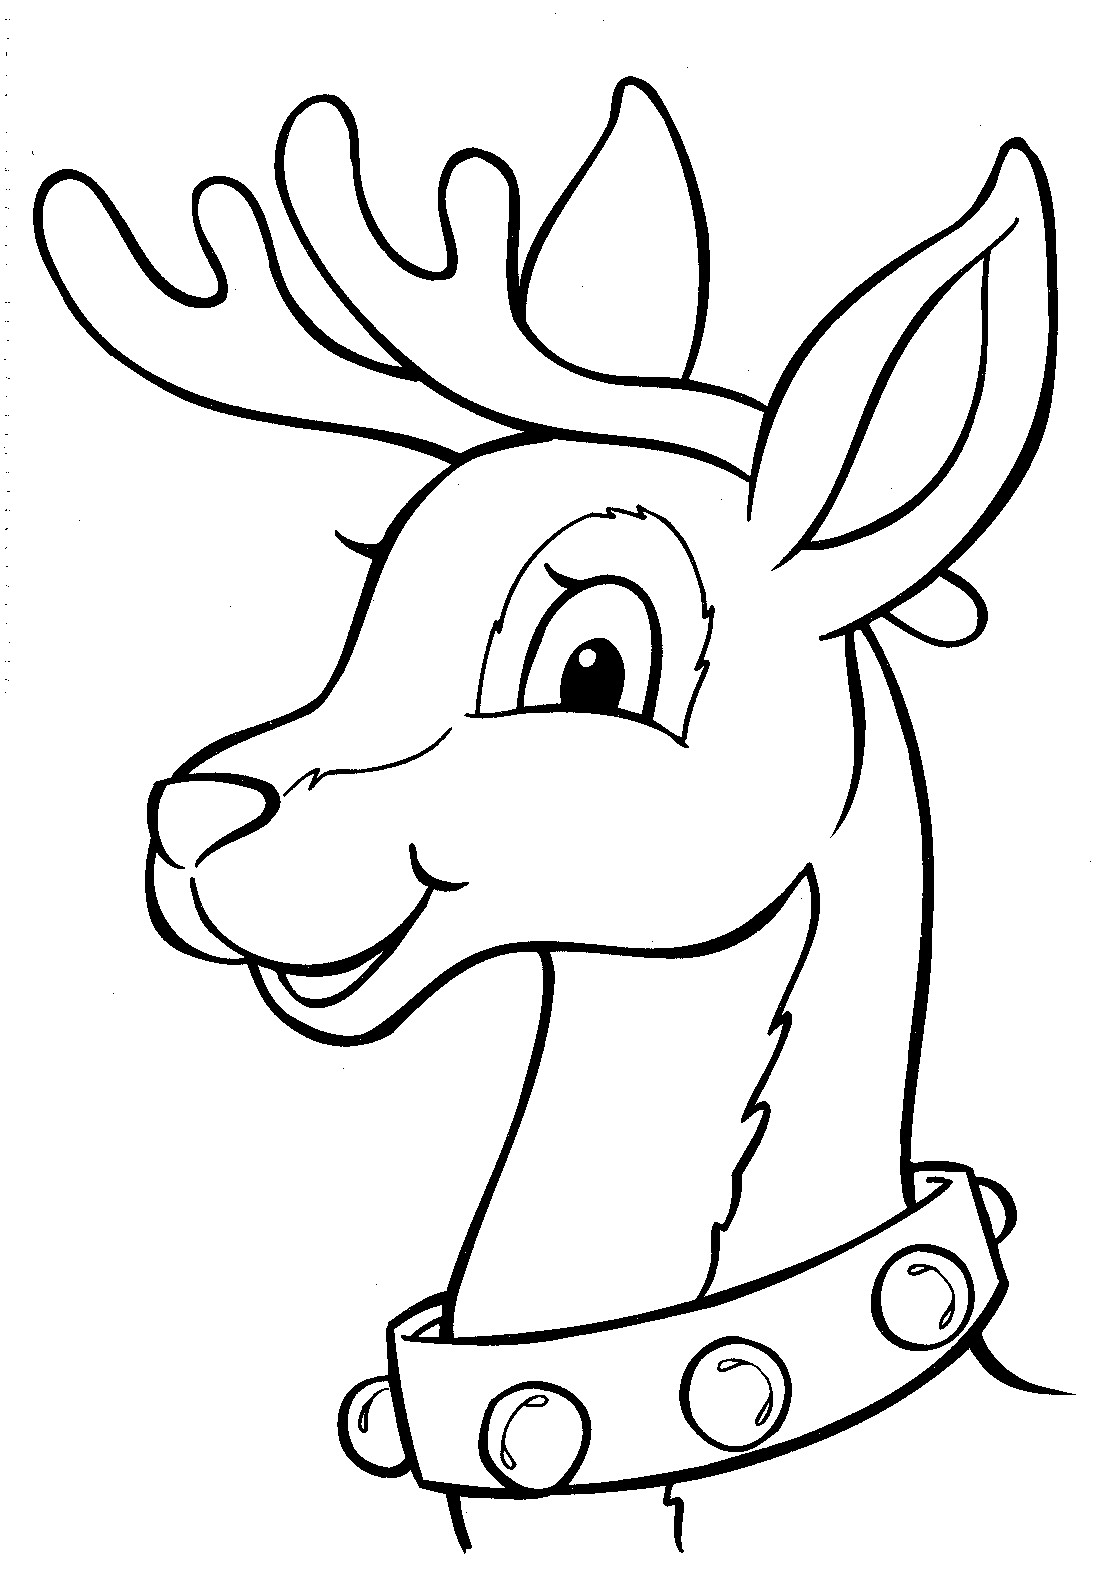 Coloring Pages For Christmas
 2015 coloring pages for Christmas wallpapers images